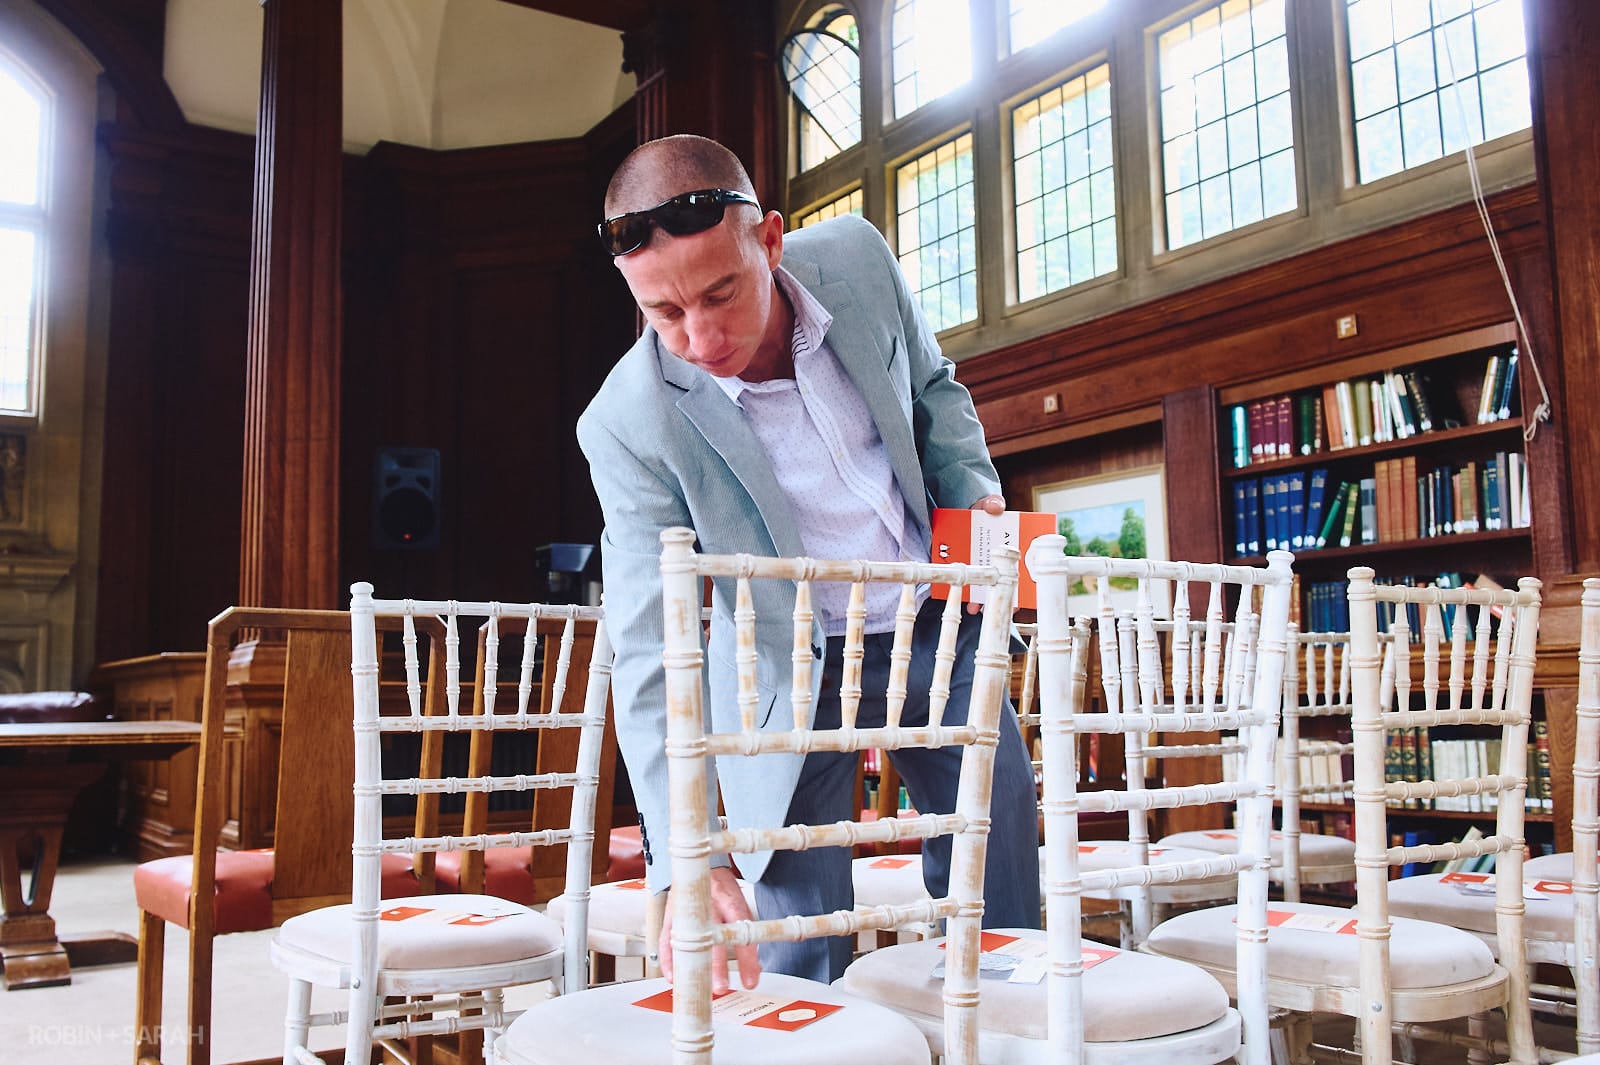 Groomsman places order of service cards on chairs